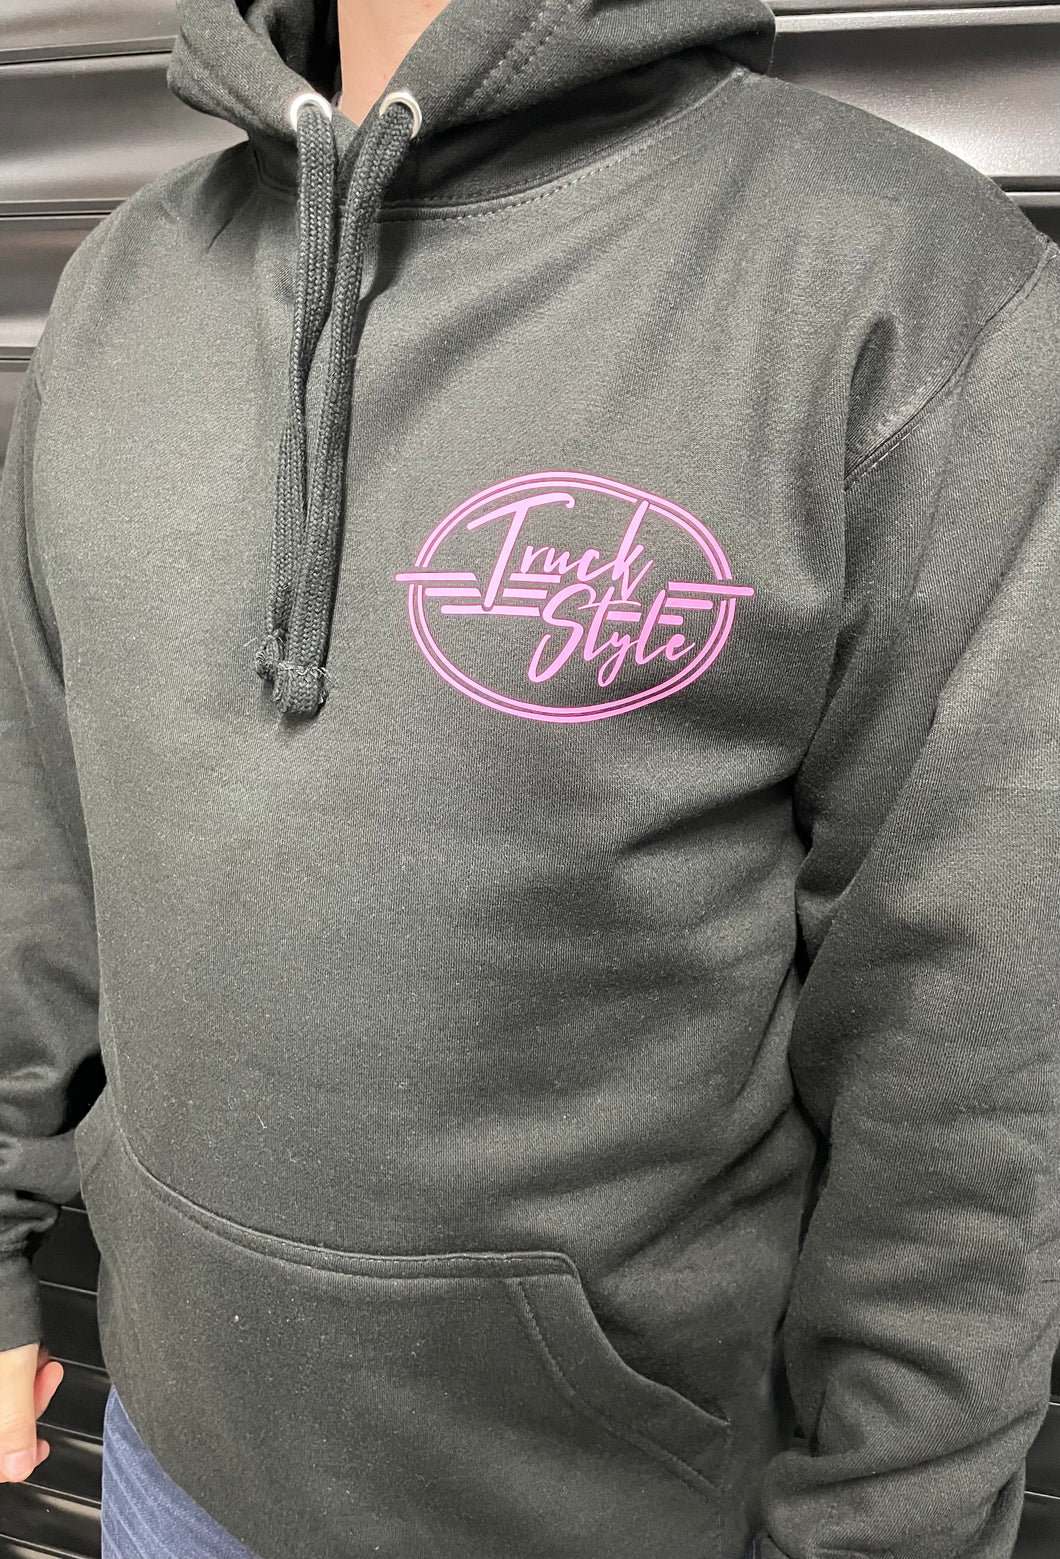 Truckstyle OG Pink Edition Hoody